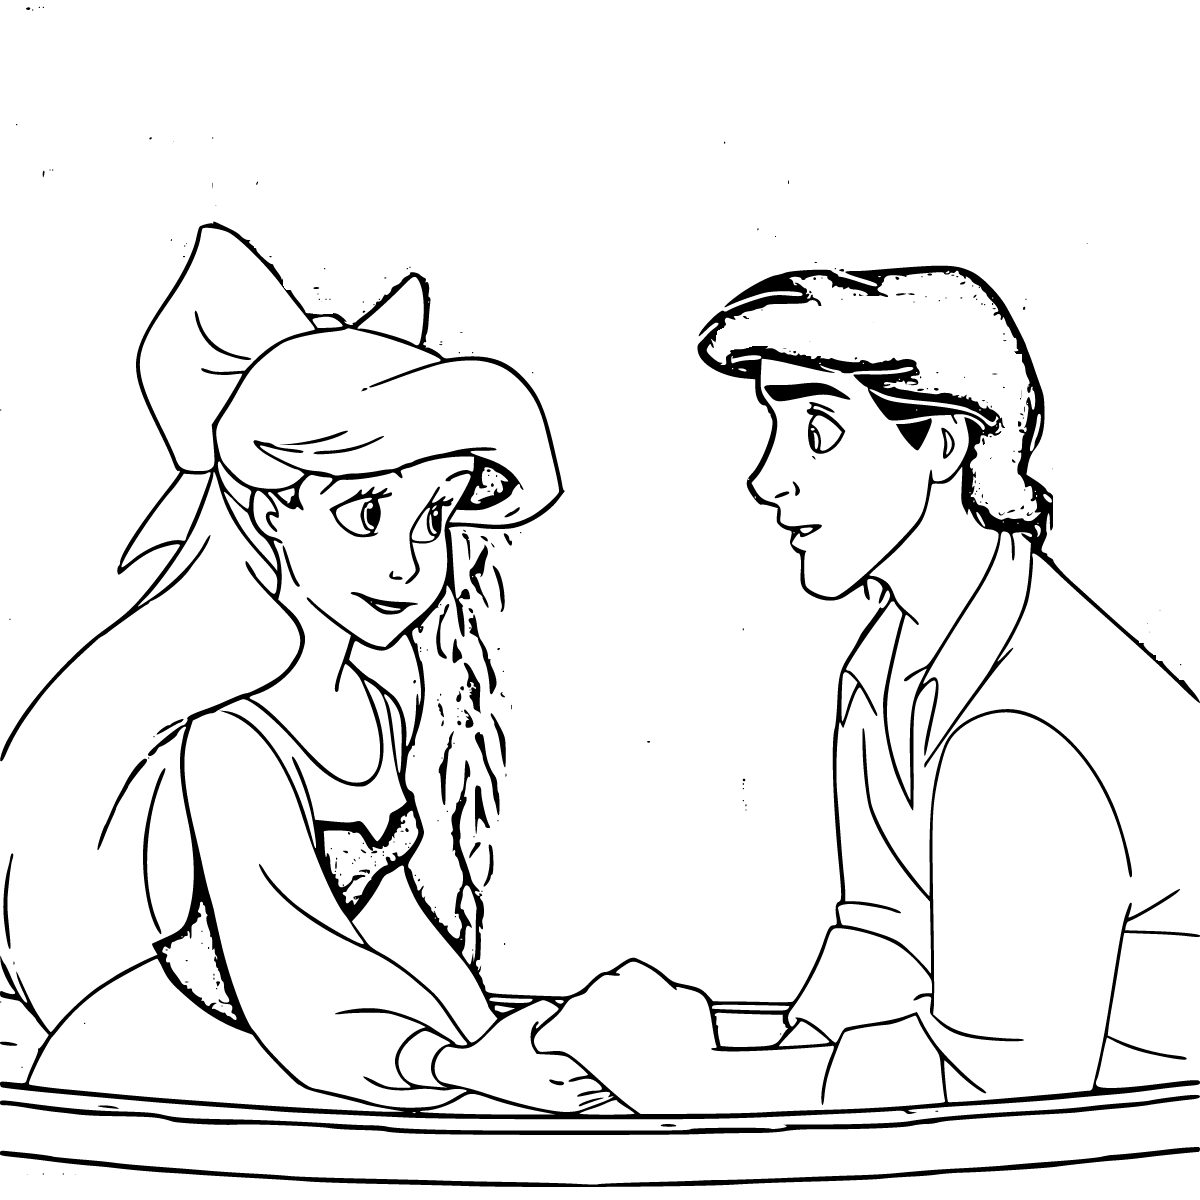 Princess Ariel The Little Mermaid Coloring Page for Free - SheetalColor.com